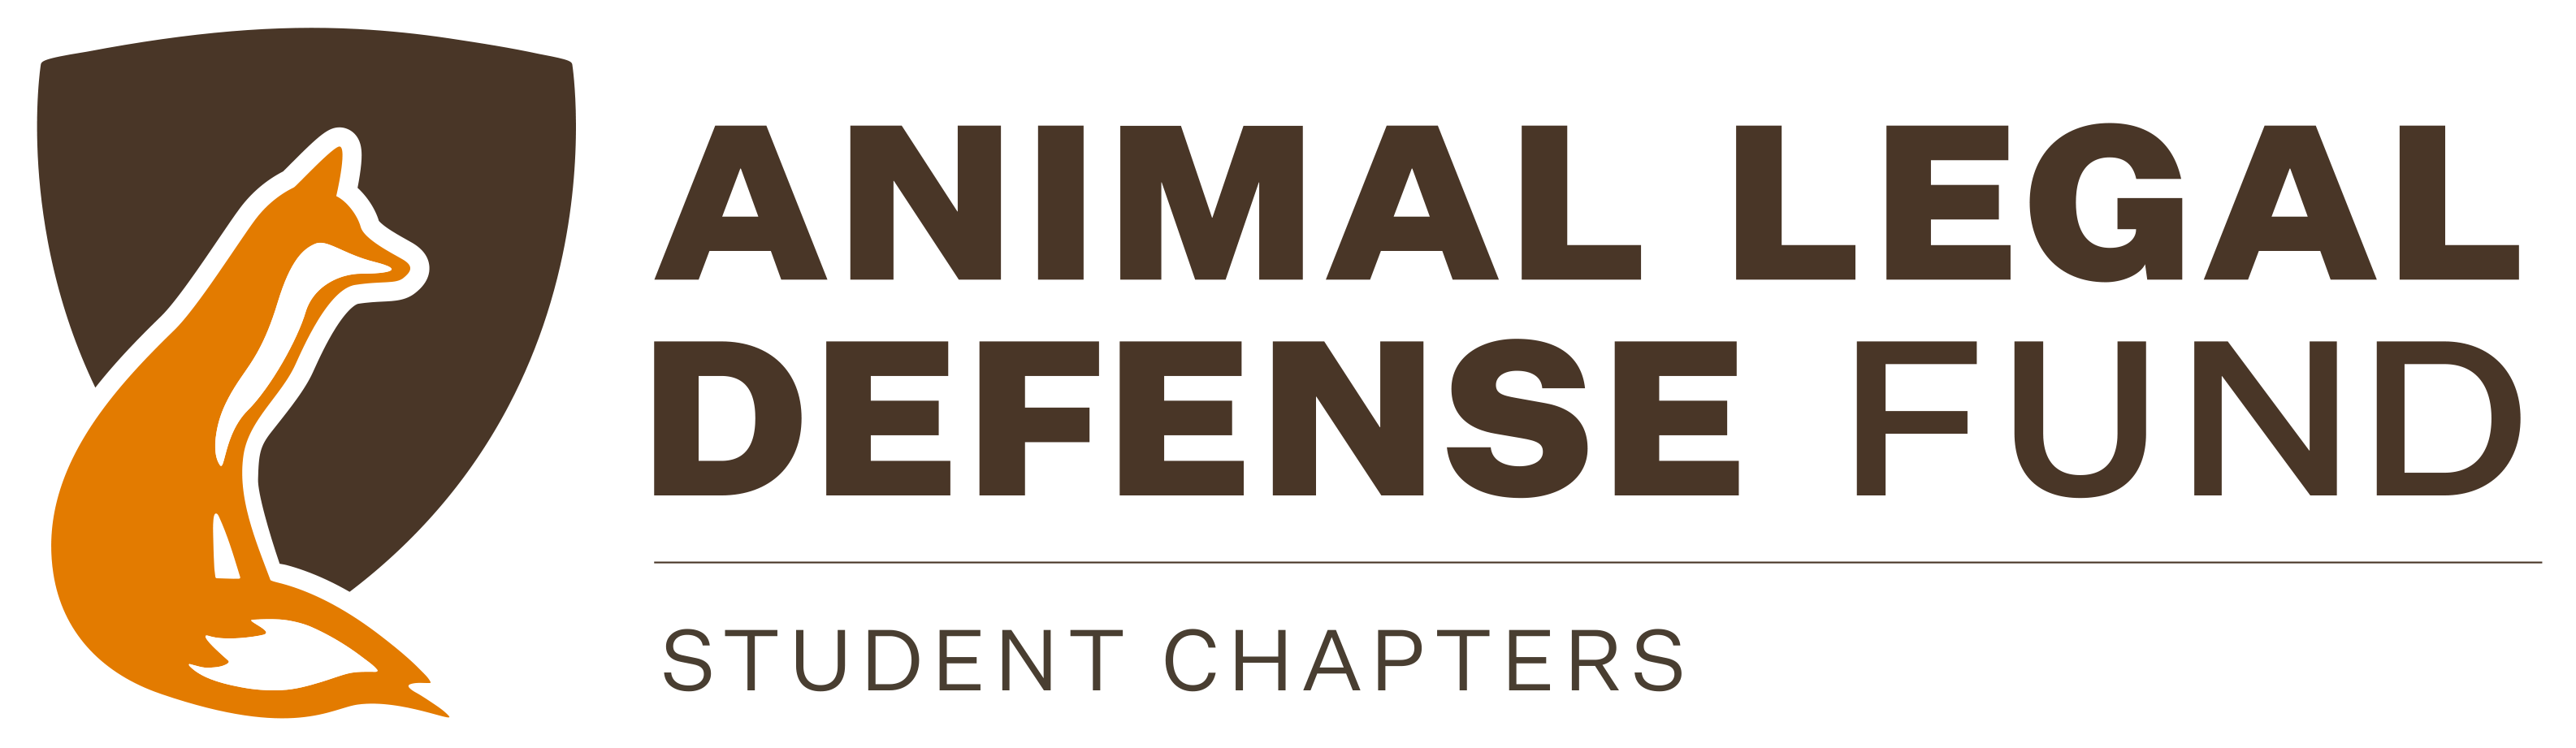 Chapters Logo - ALDF Student Chapters Logo Horizontal 8.2018 Legal Defense Fund